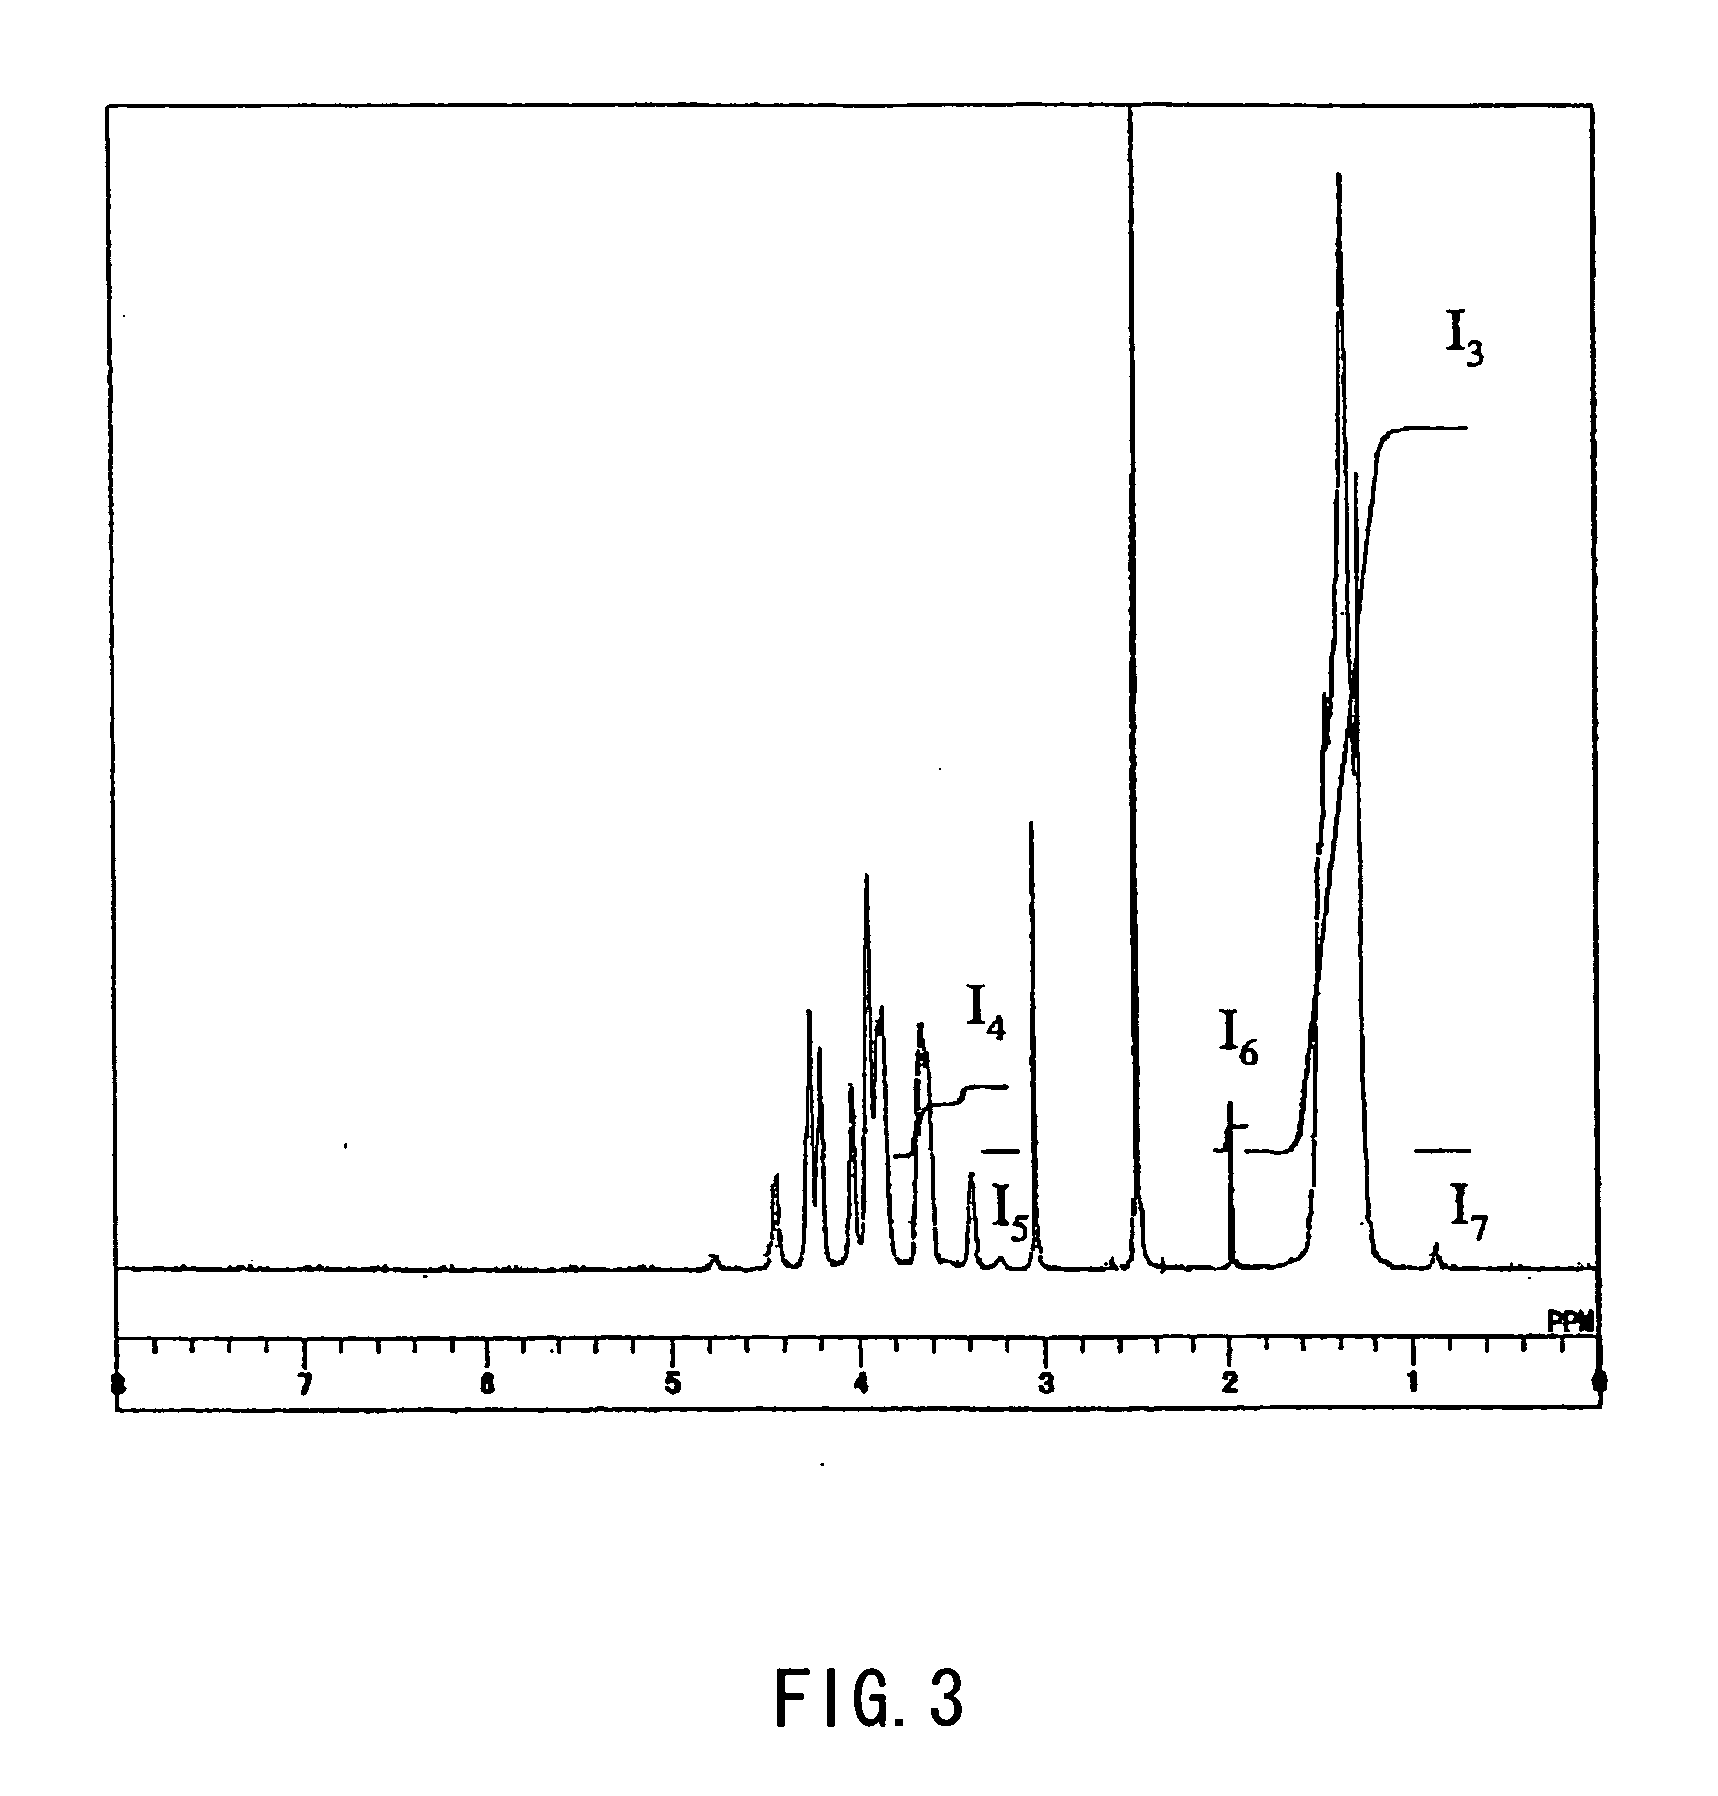 Ethylene-vinyl alcohol based copolymer and method for production thereof